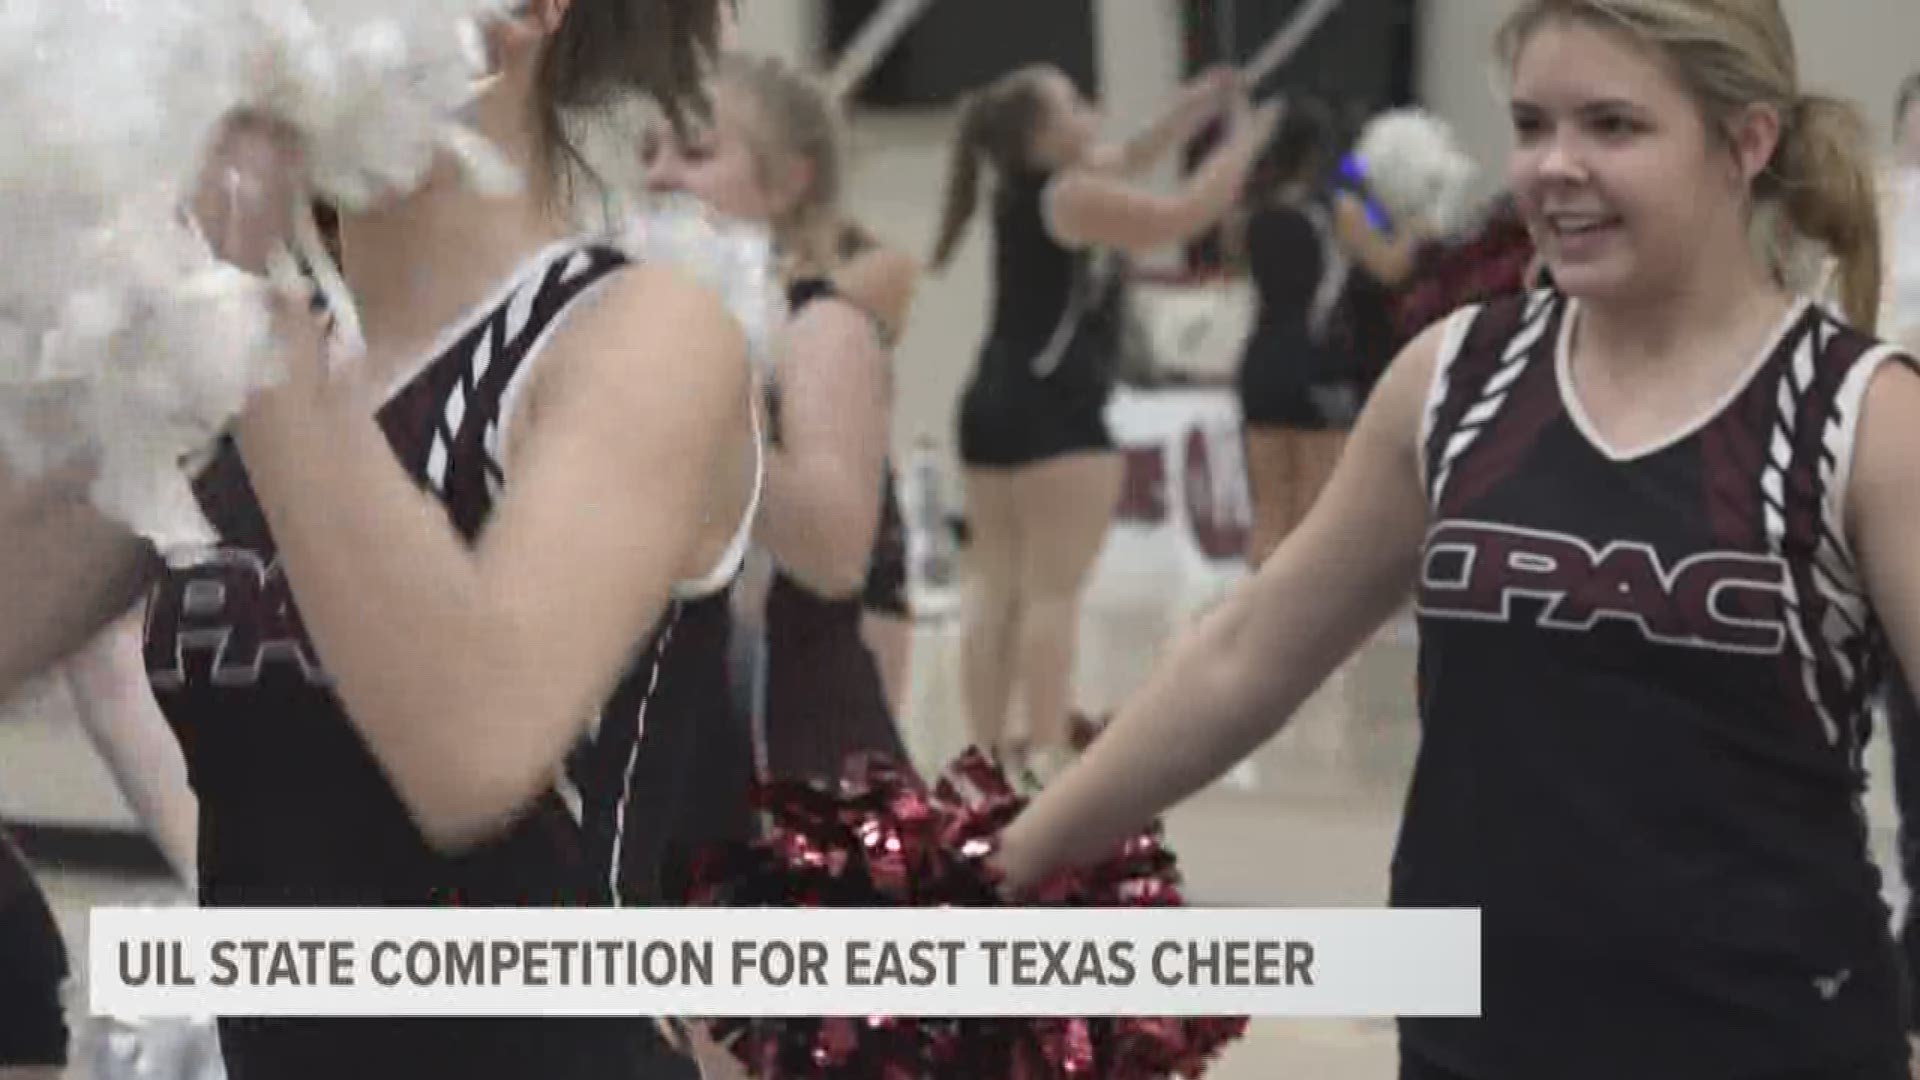 Just because high school football season is over, doesn't mean cheerleaders get a break.Beginning today, teams across East Texas will be competing in the UIL state competition in Fort Worth. The Morning Loop's Monica Ortiz got an inside look at Whitehouse High School's cheer team, and all the preparation that goes into getting ready.